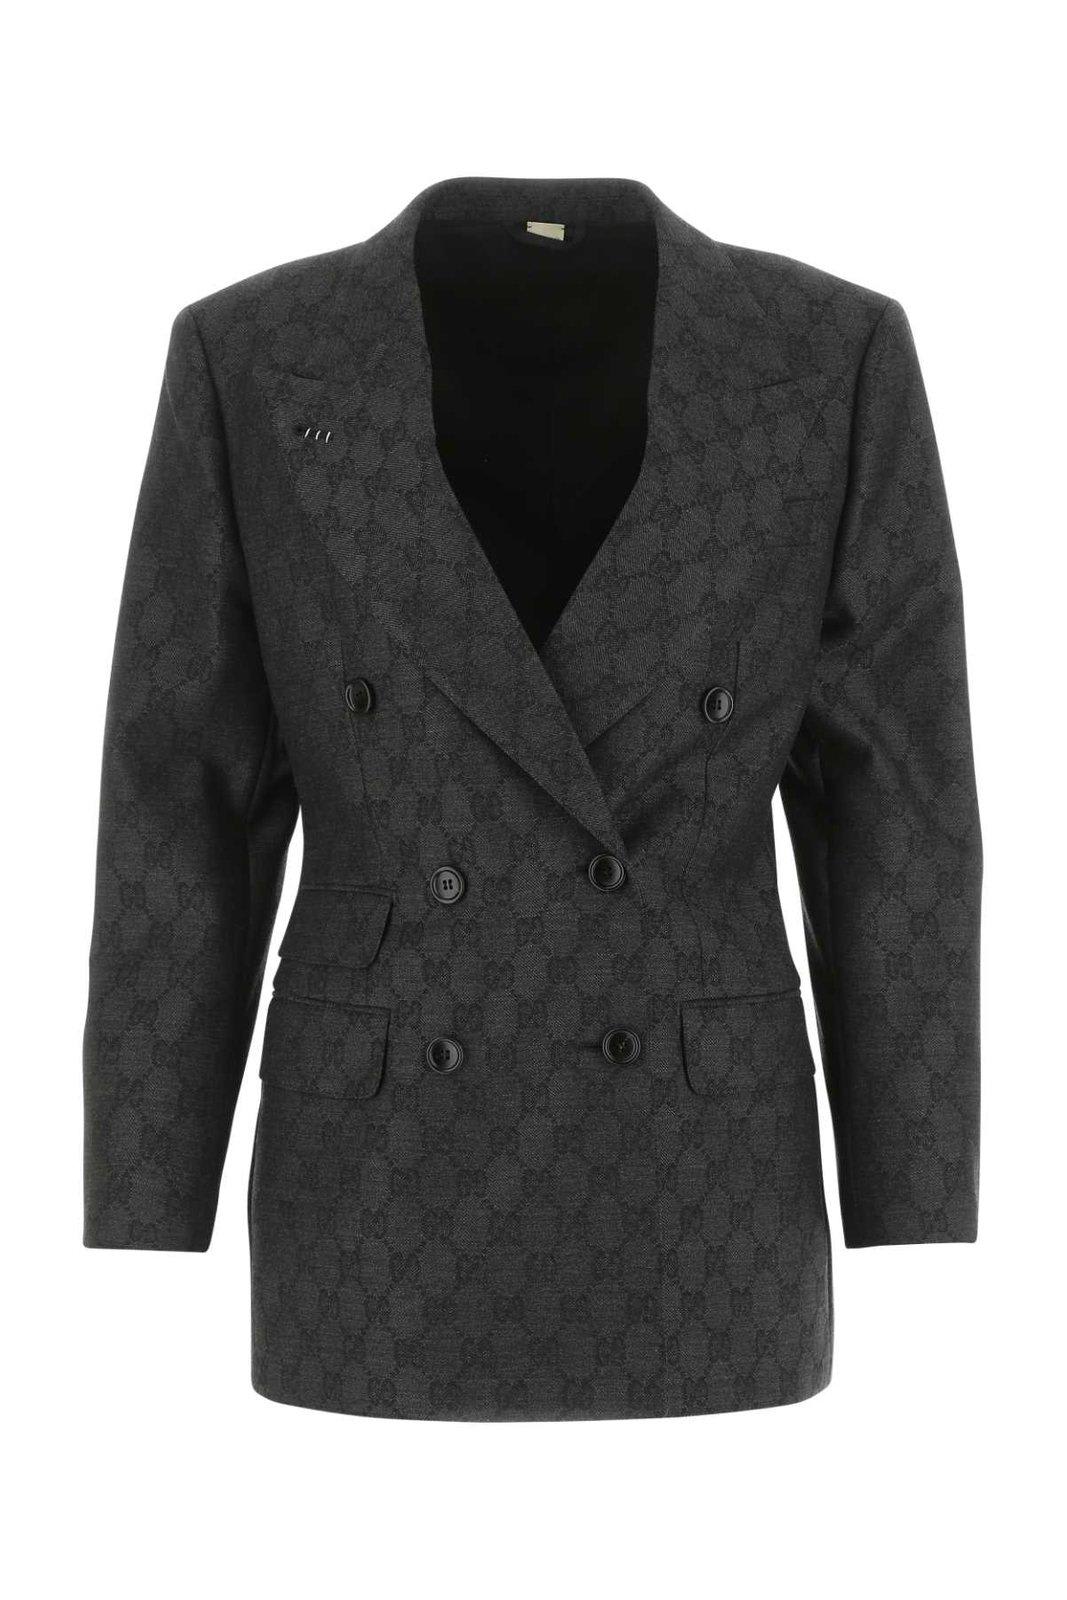 Gg Jacquard Double-breasted Jacket